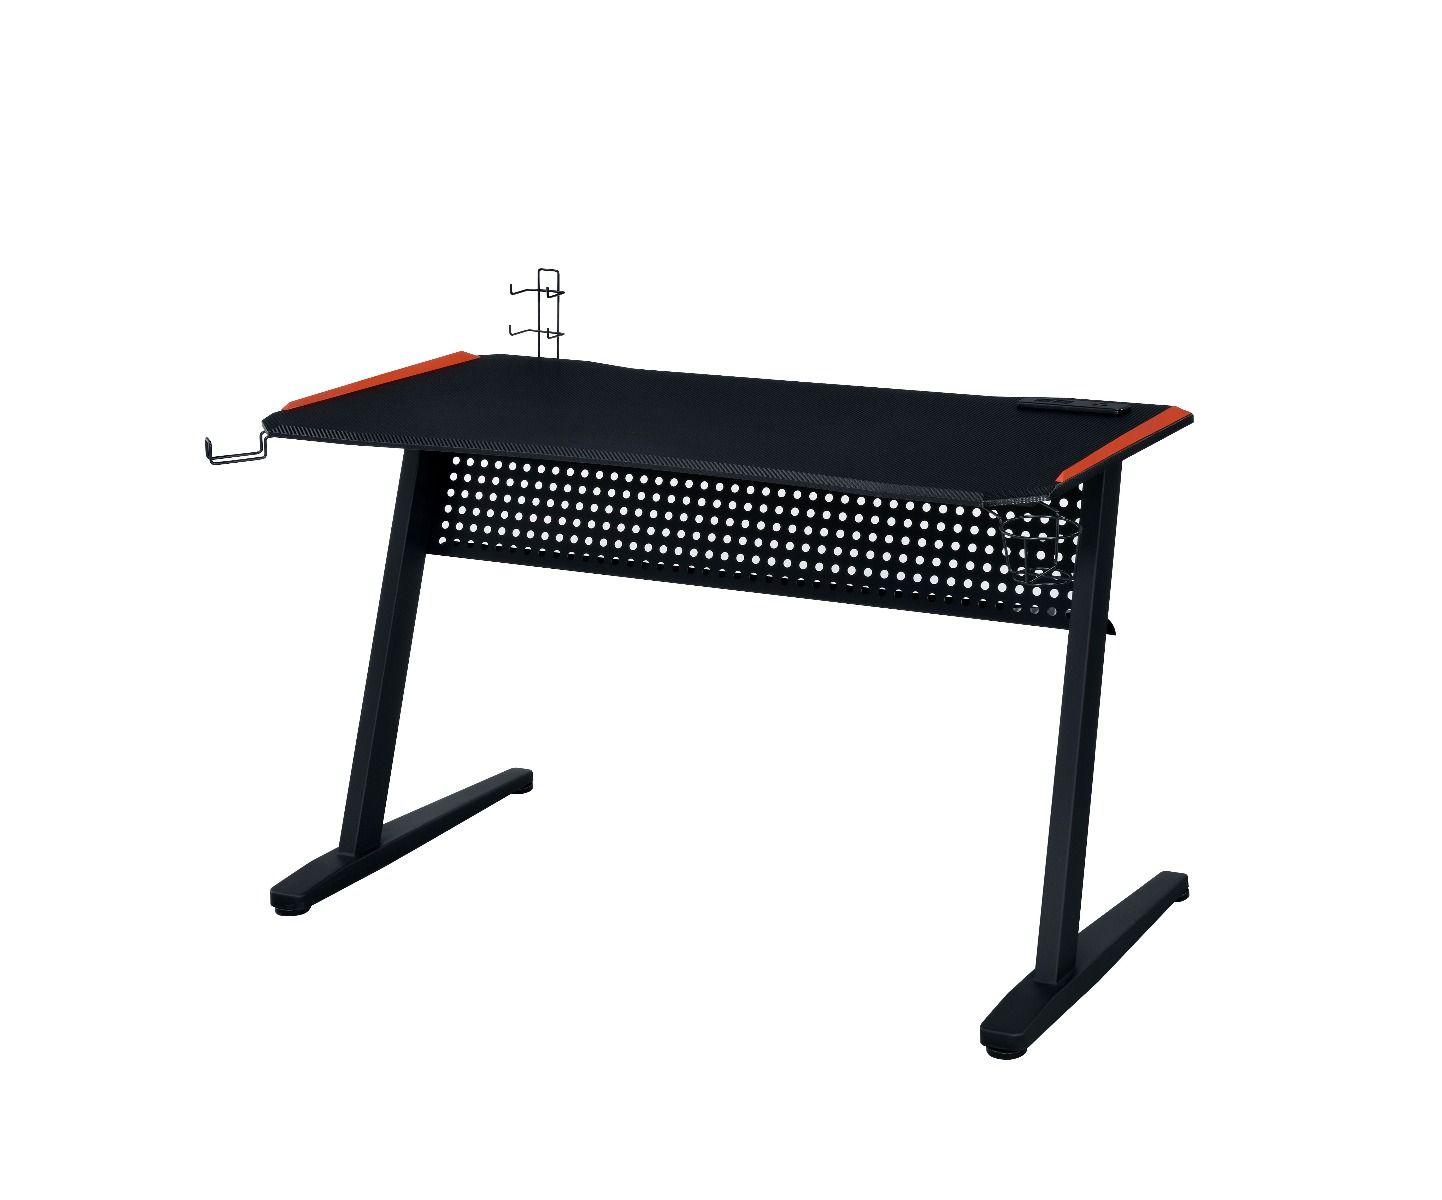 Contemporary Game table 93125 Dragi 93125 in Red, Black 